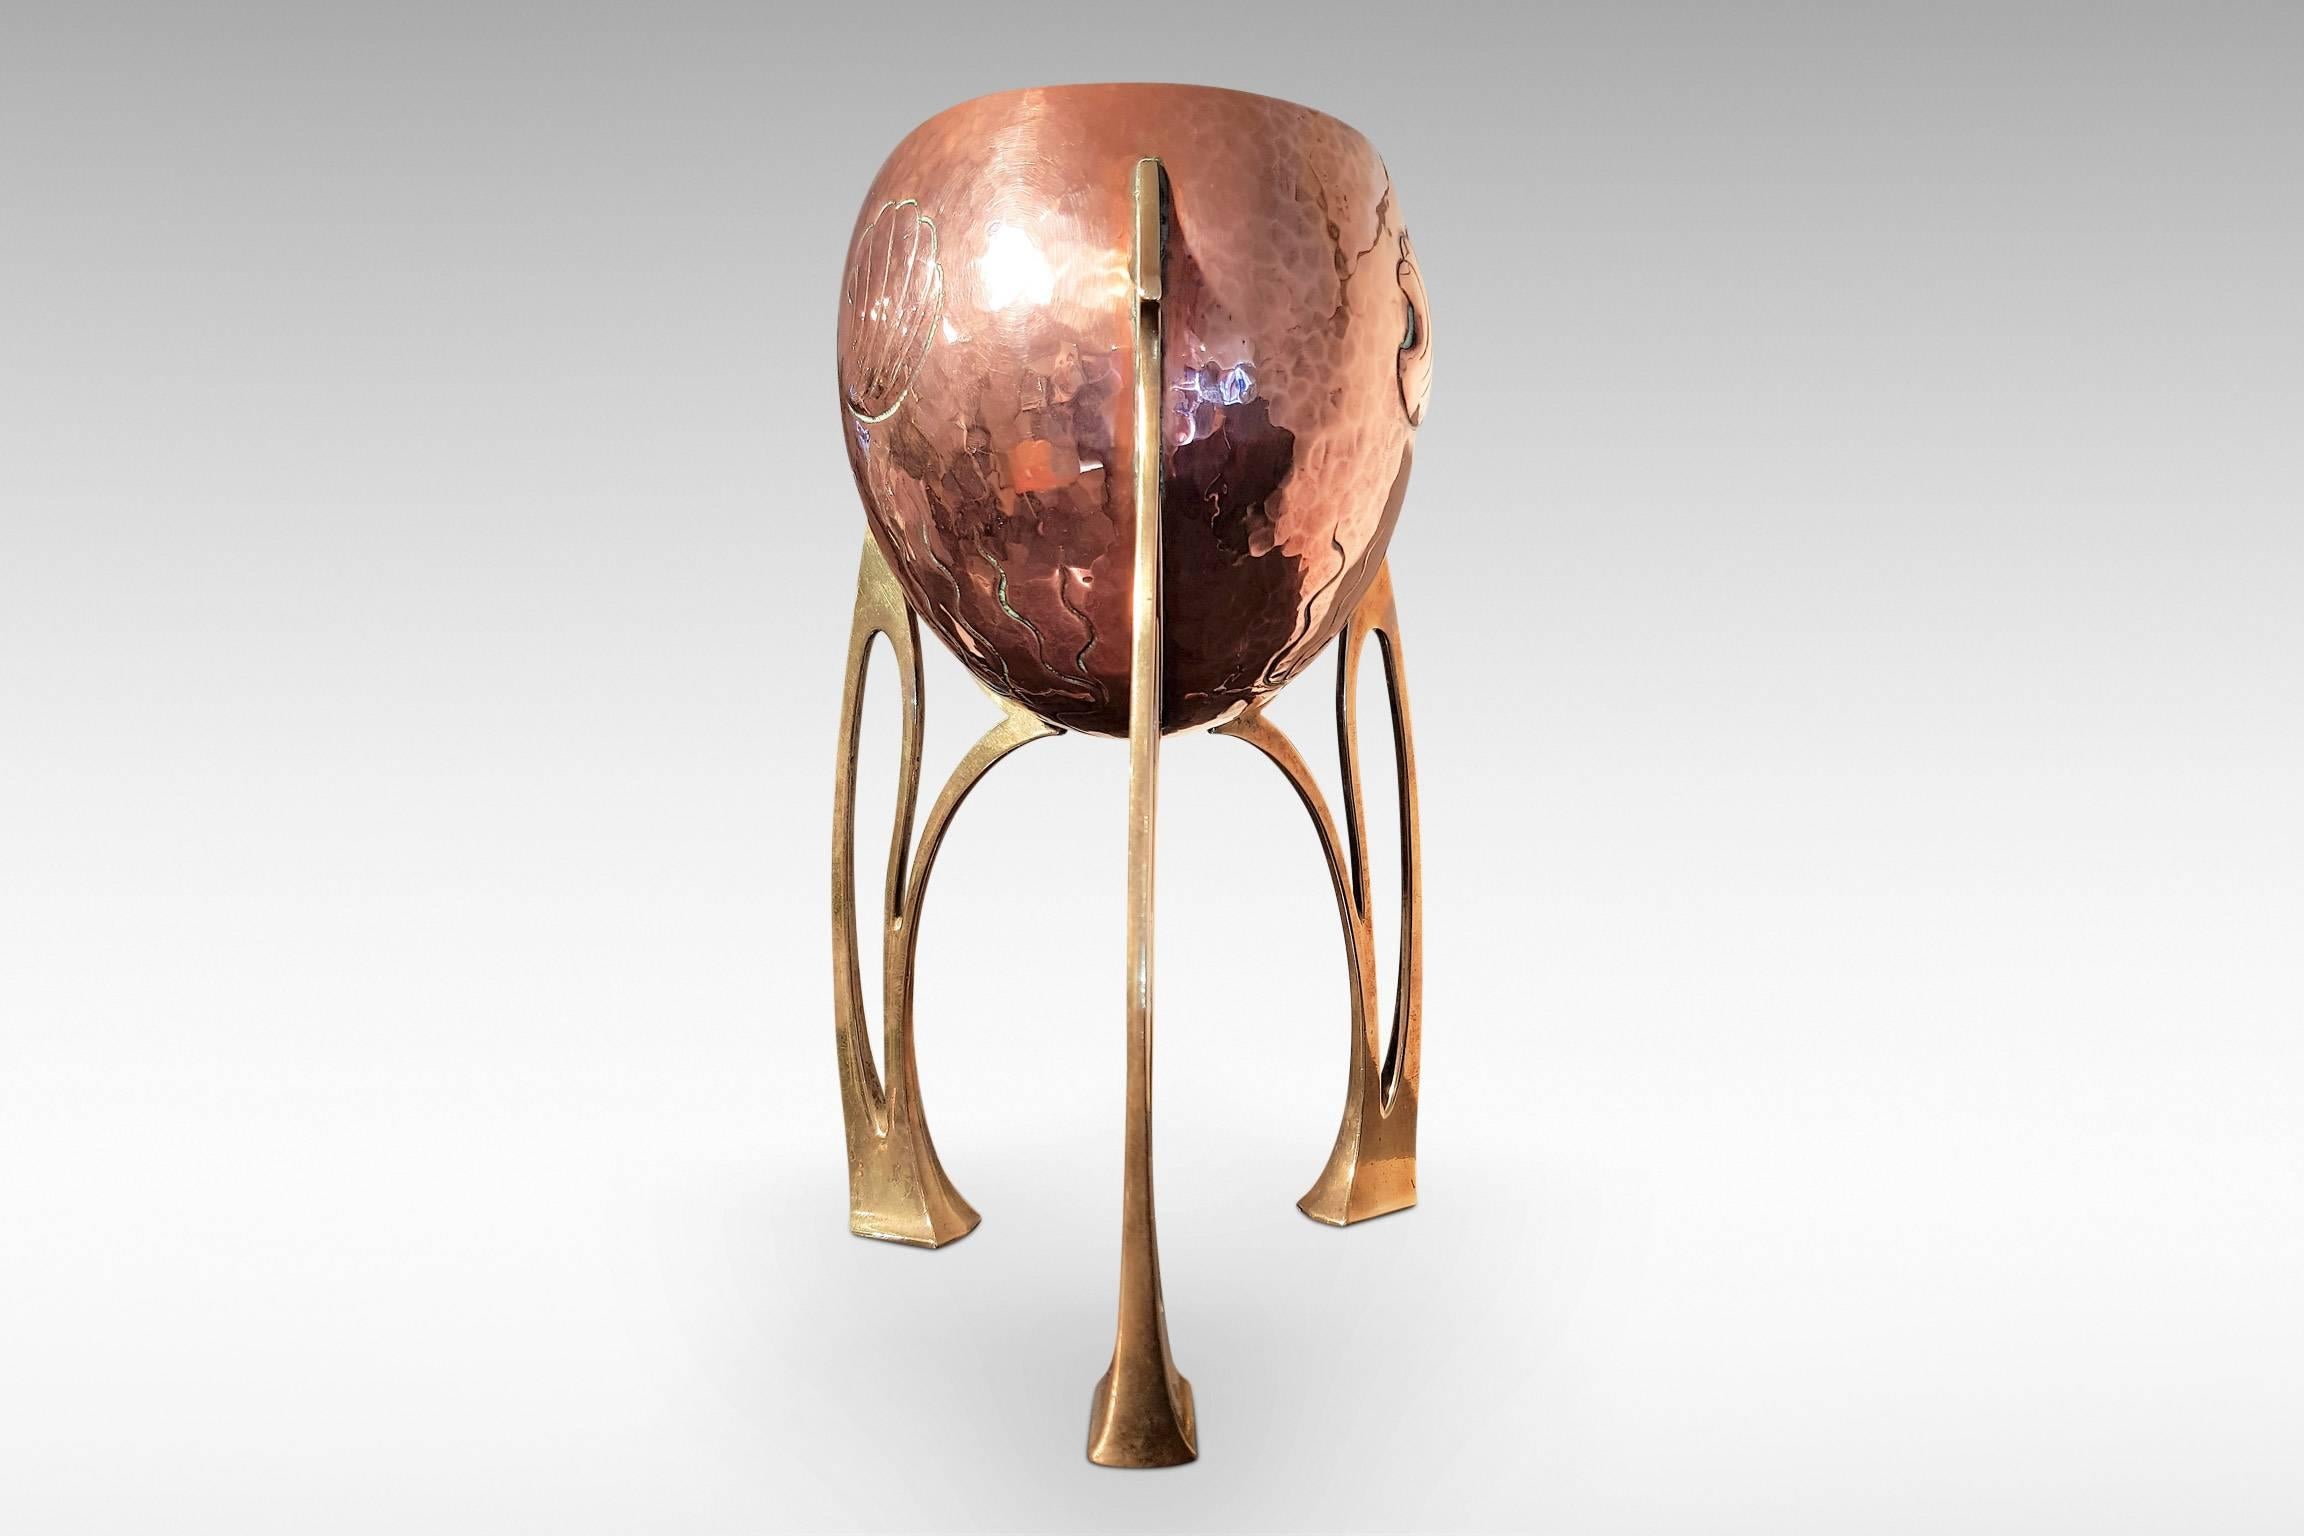 A highly stylish WMF planter or jardinière by WMF in copper and brass.
WMF ostrich mark to underside of foot,
circa 1910.